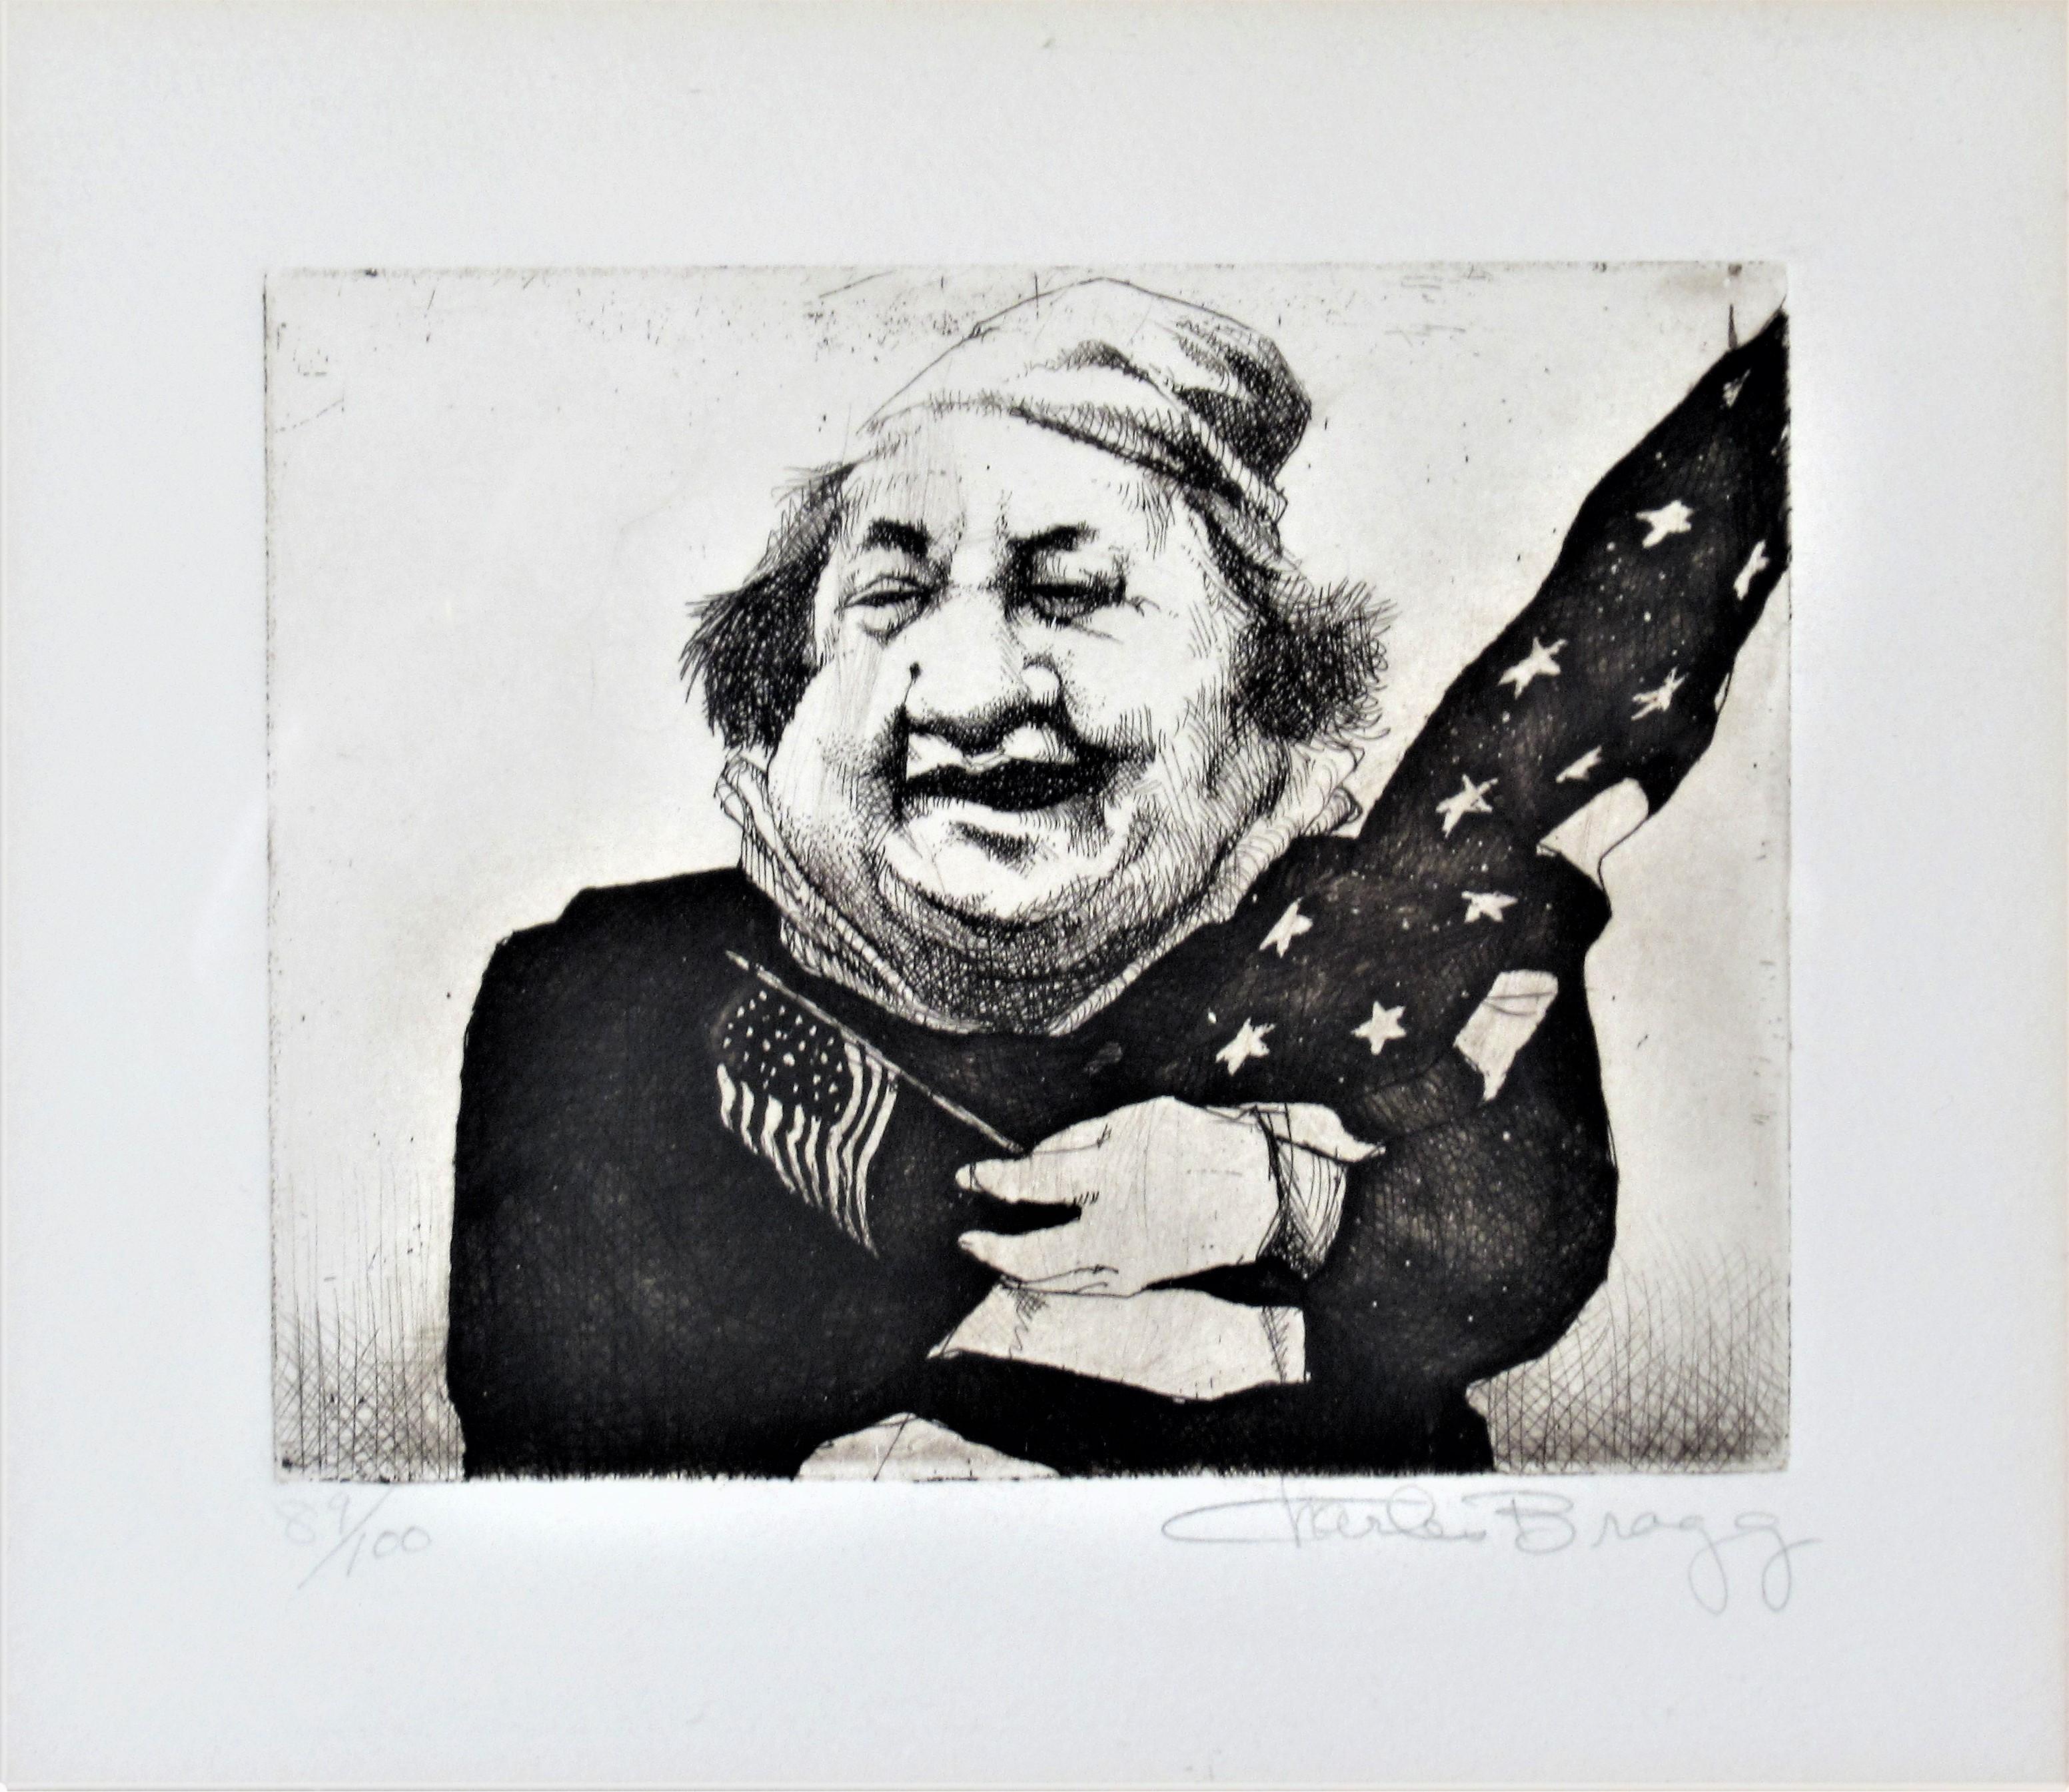 Man with Flags - Print by Charles Bragg